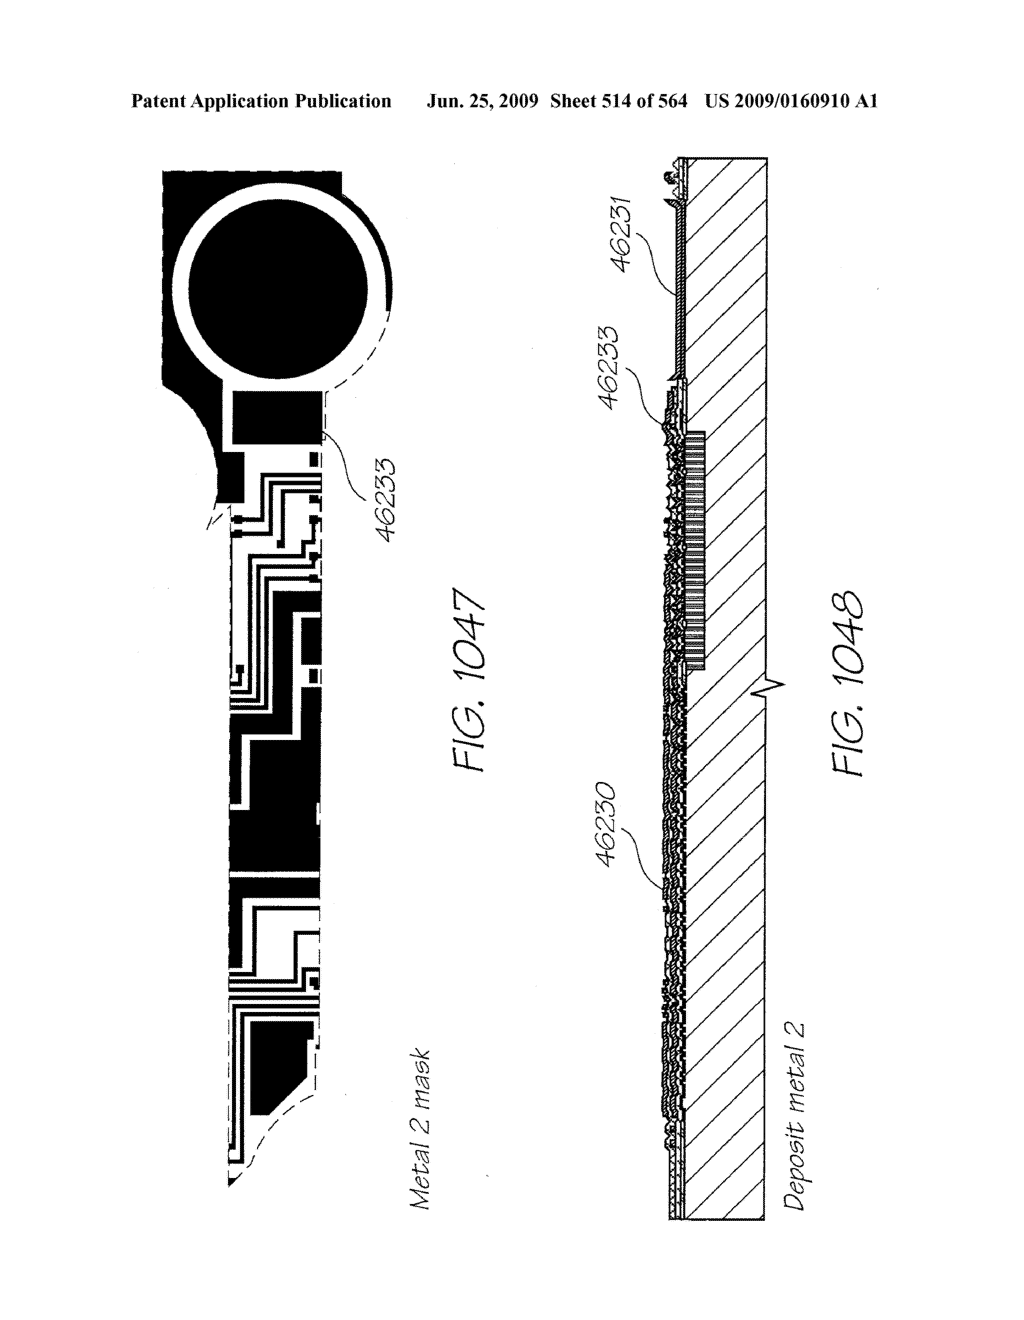 INKJET PRINTHEAD WITH HEATER ELEMENT CLOSE TO DRIVE CIRCUITS - diagram, schematic, and image 515